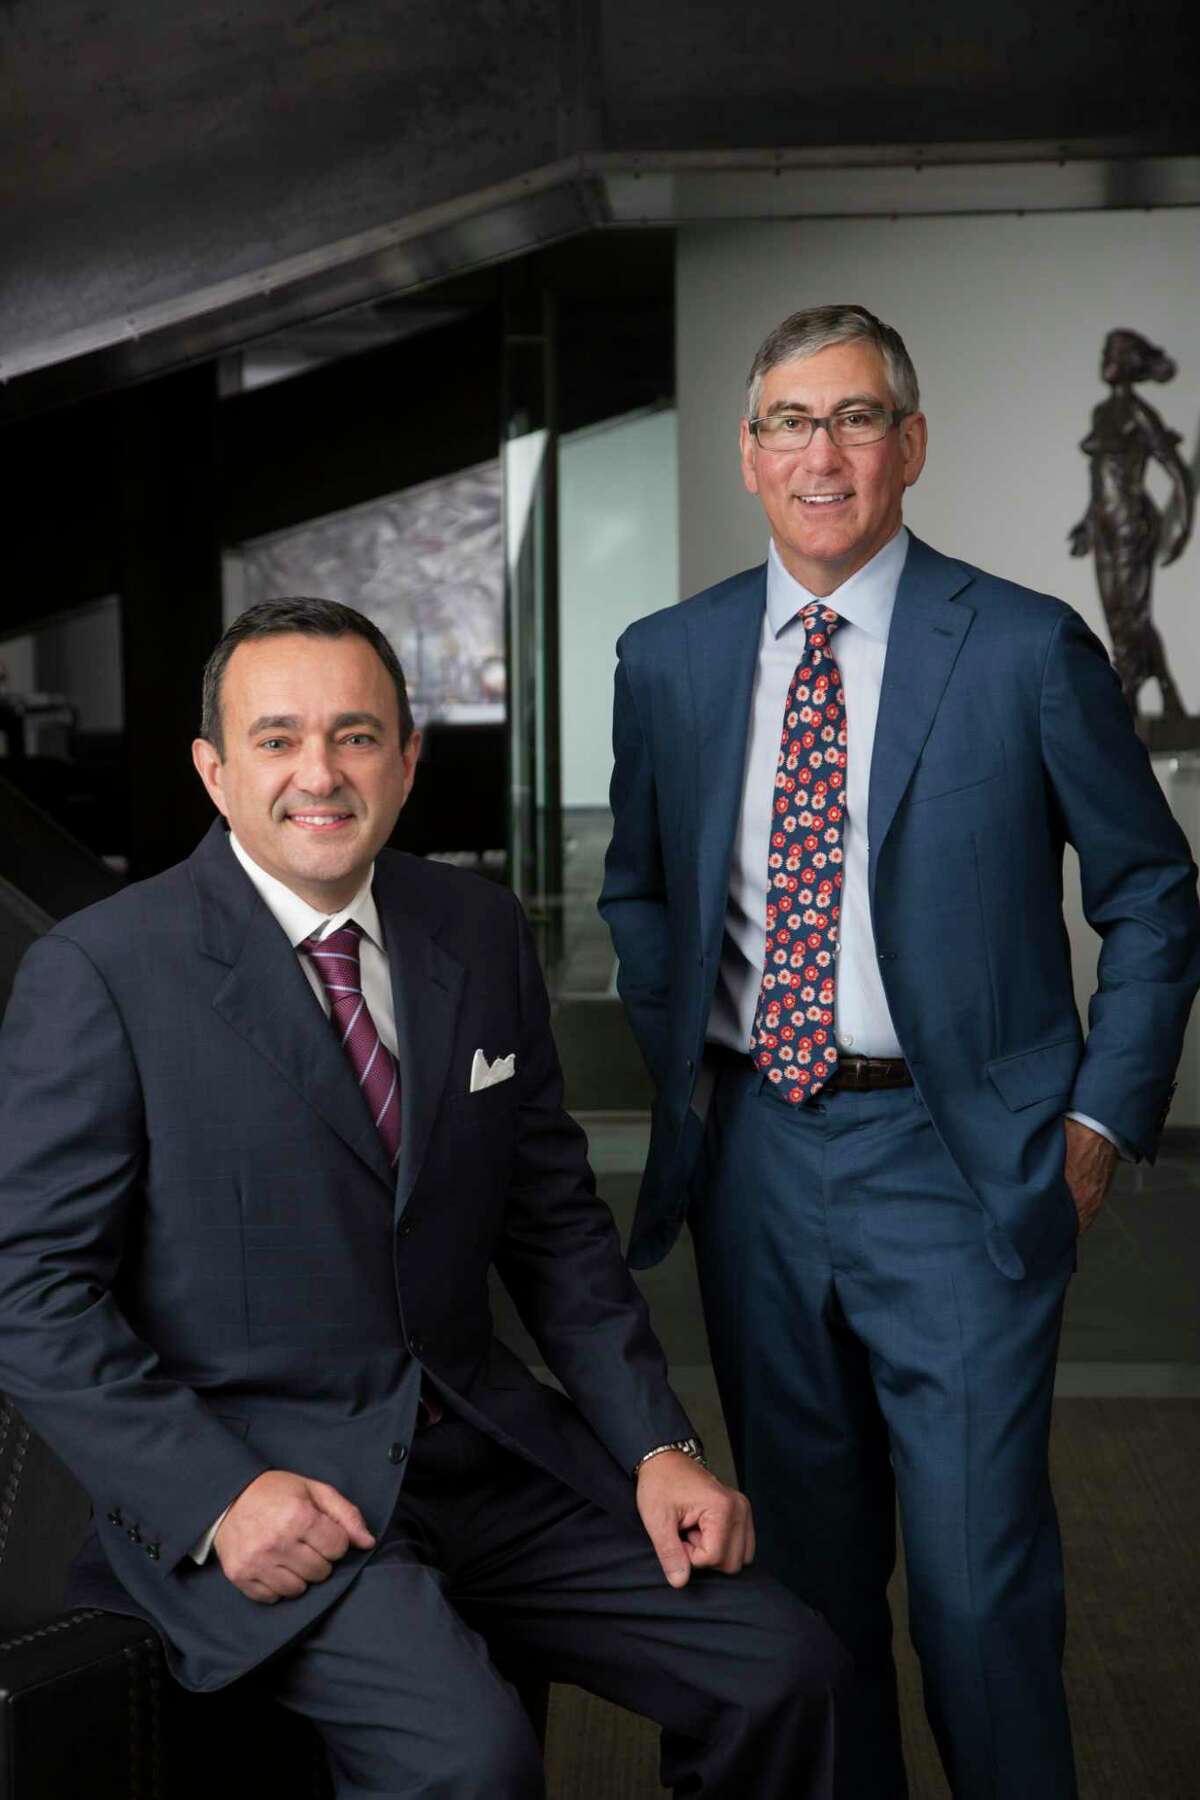 John Zavitsanos, seated, and Joe Ahmad, founding partners of Ahmad, Zavitsanos, Anaipakos, Alavi & Mensing. AZA was one of only two Texas-based law firms to make a list of elite law firms generating more than $1 million in revnues per lawyer.